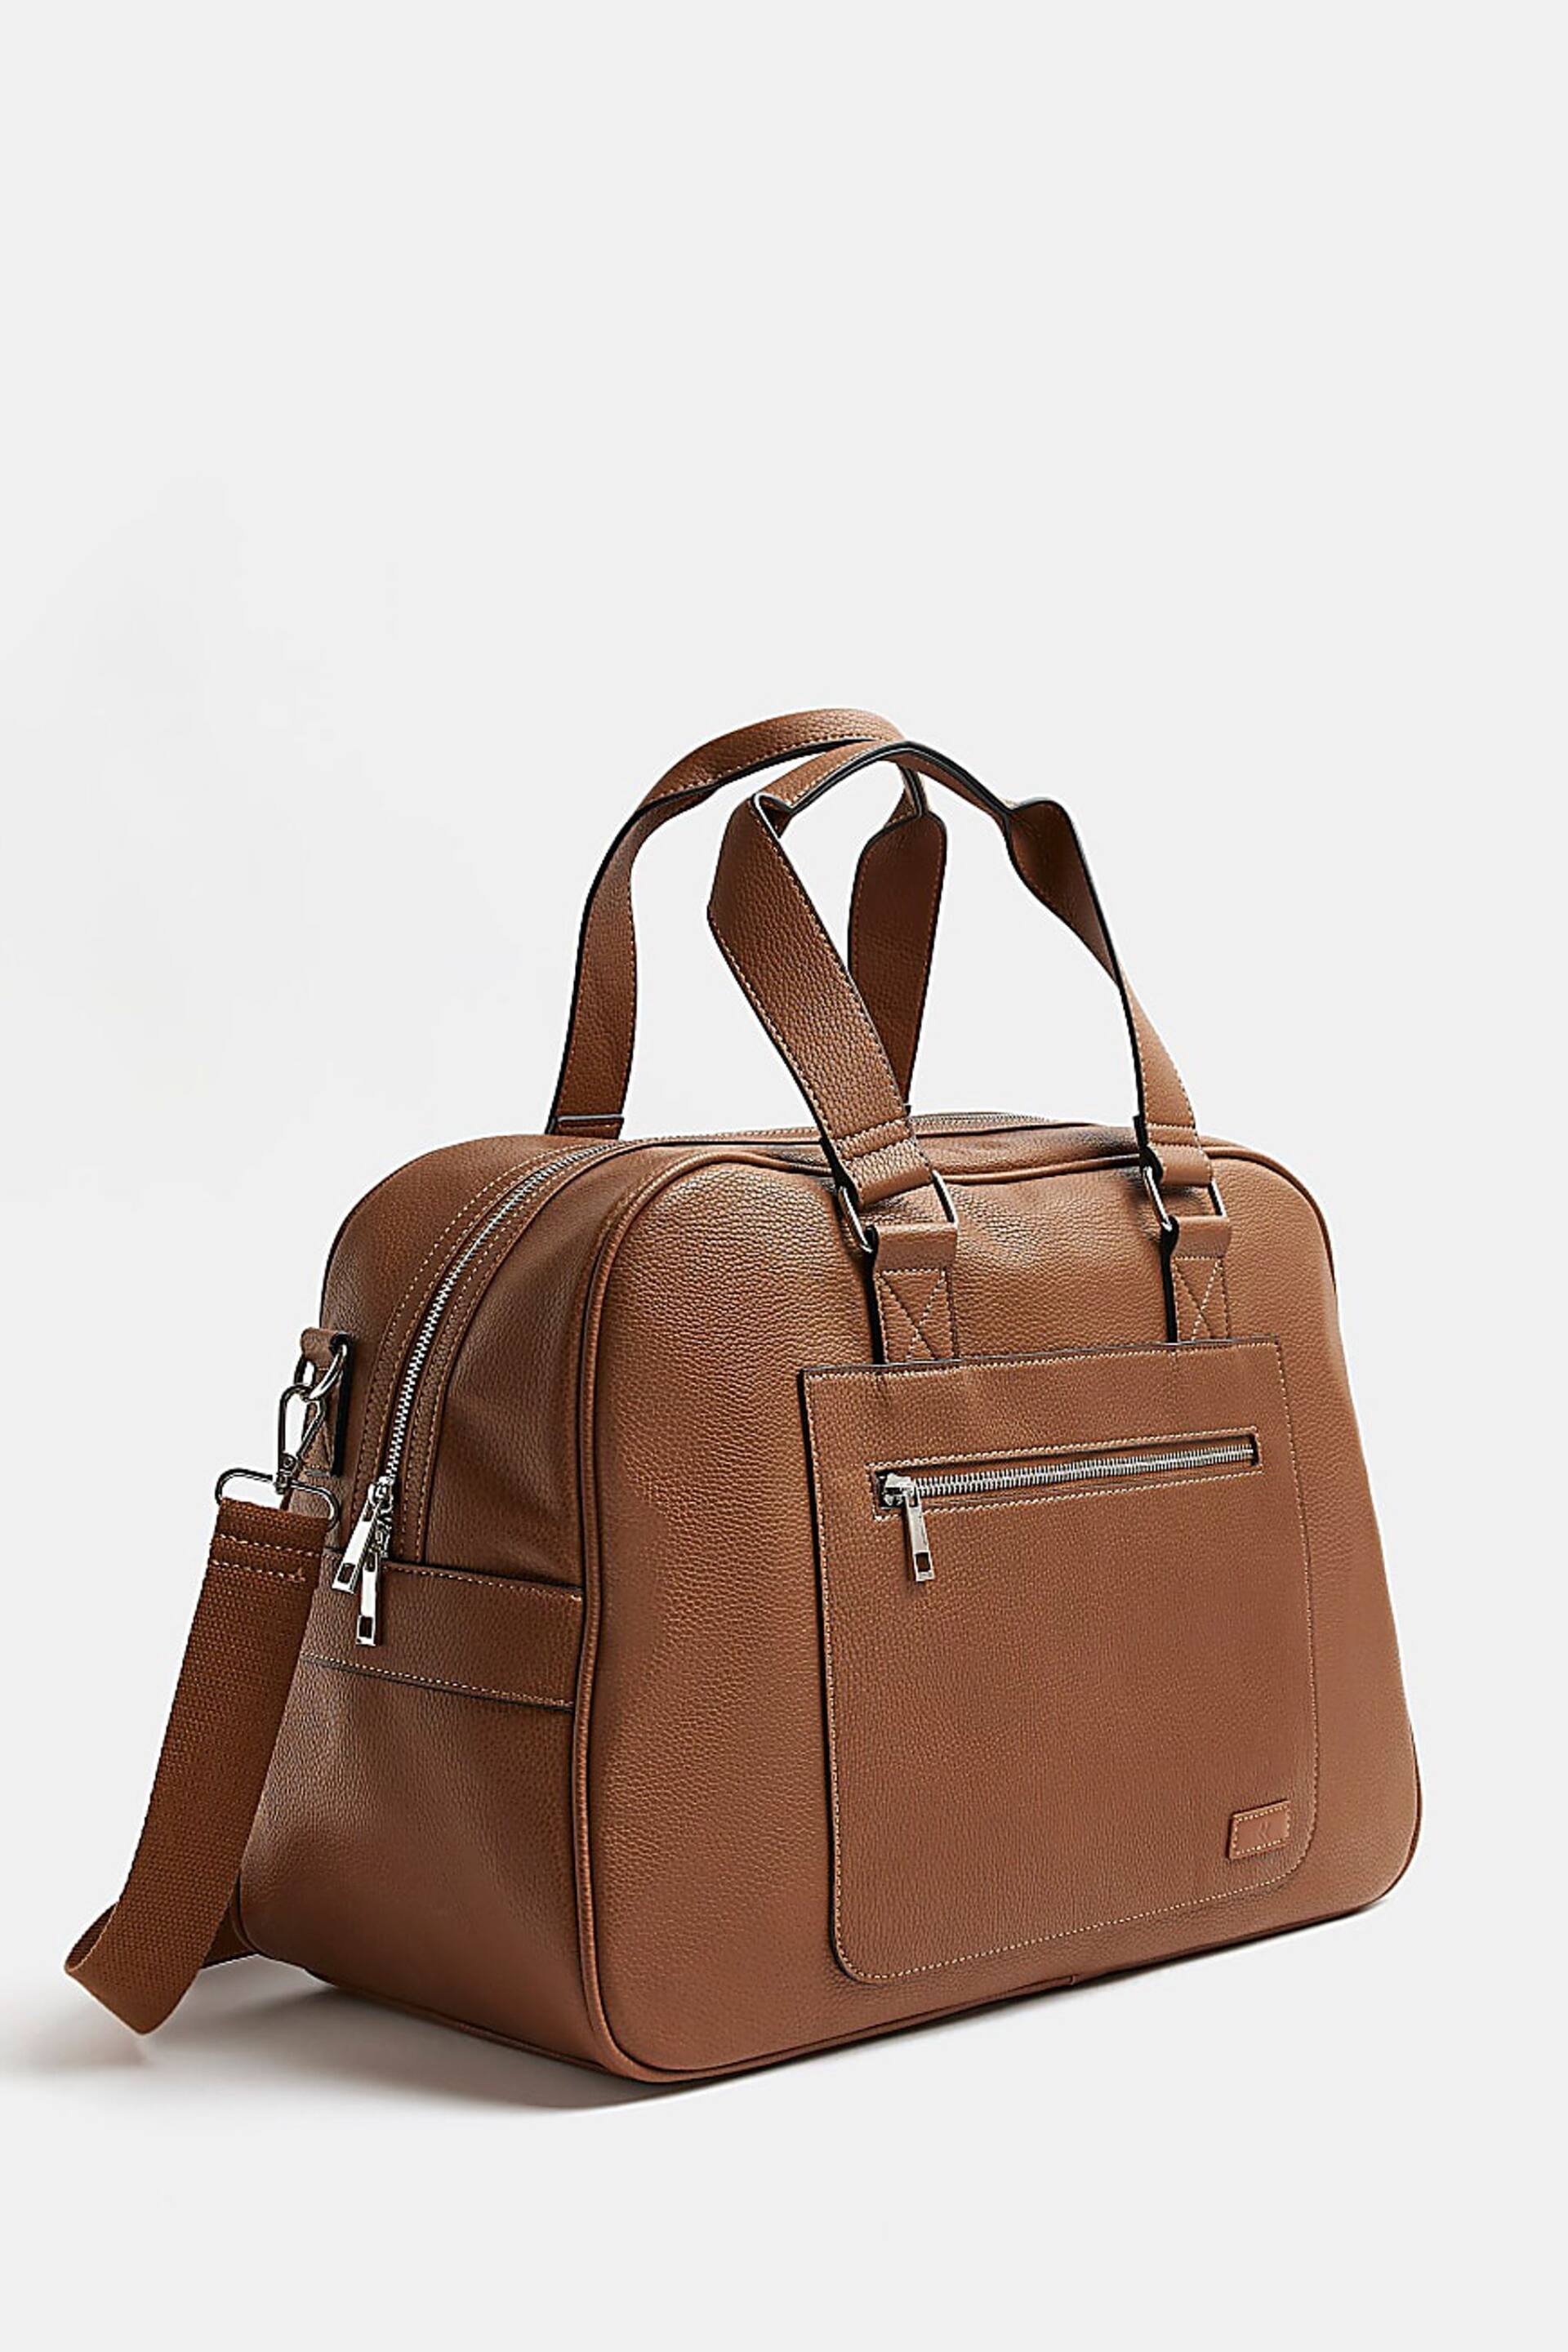 River Island Brown Light Holdall - Image 4 of 5